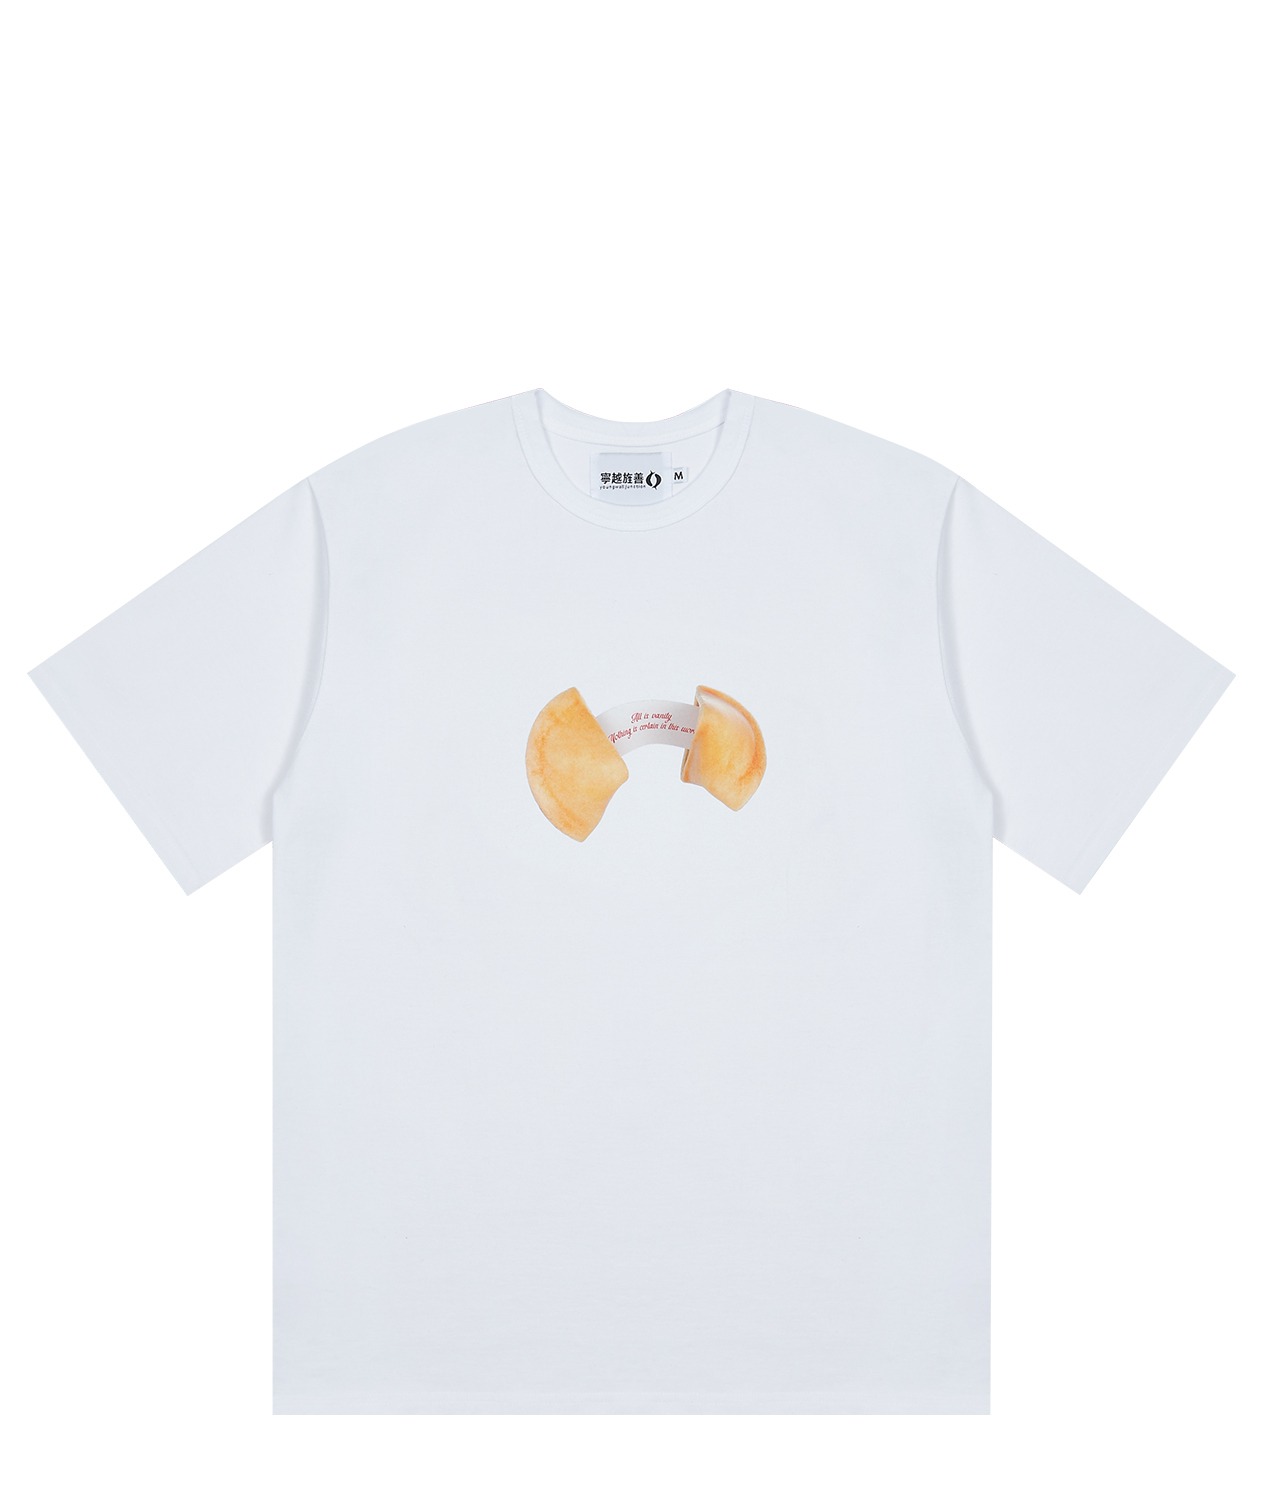 Fortune cookie TEE